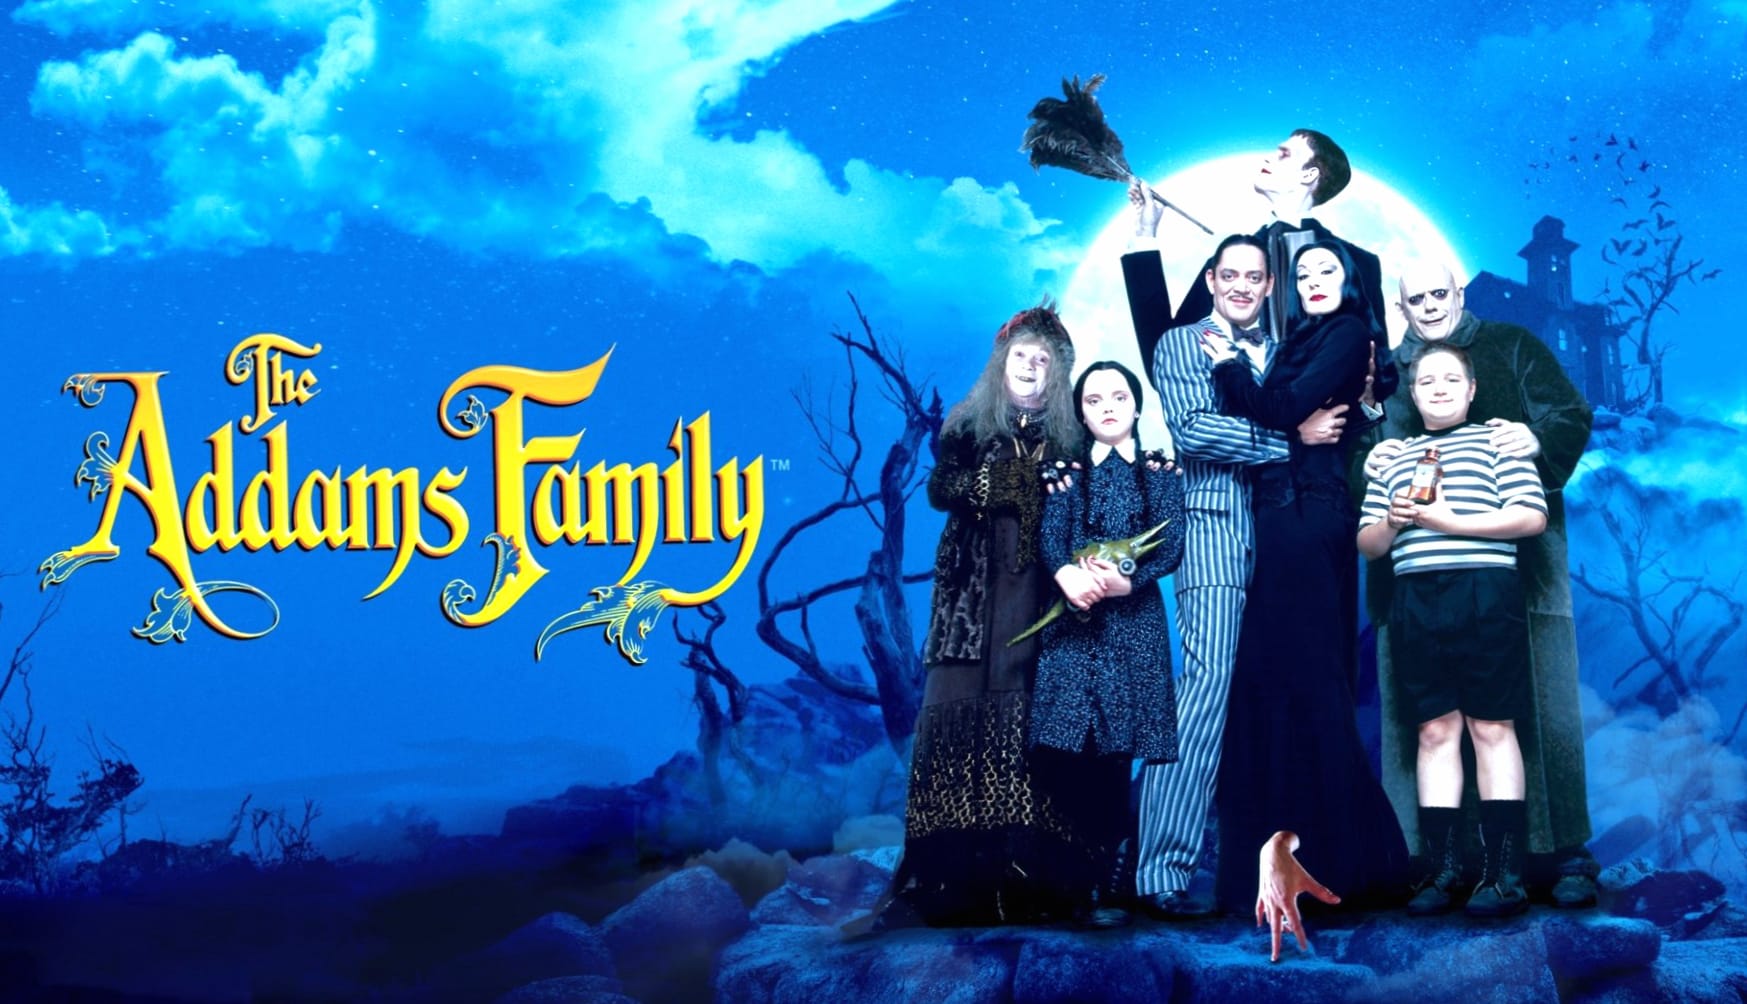 The Addams Family (1991) wallpapers HD quality